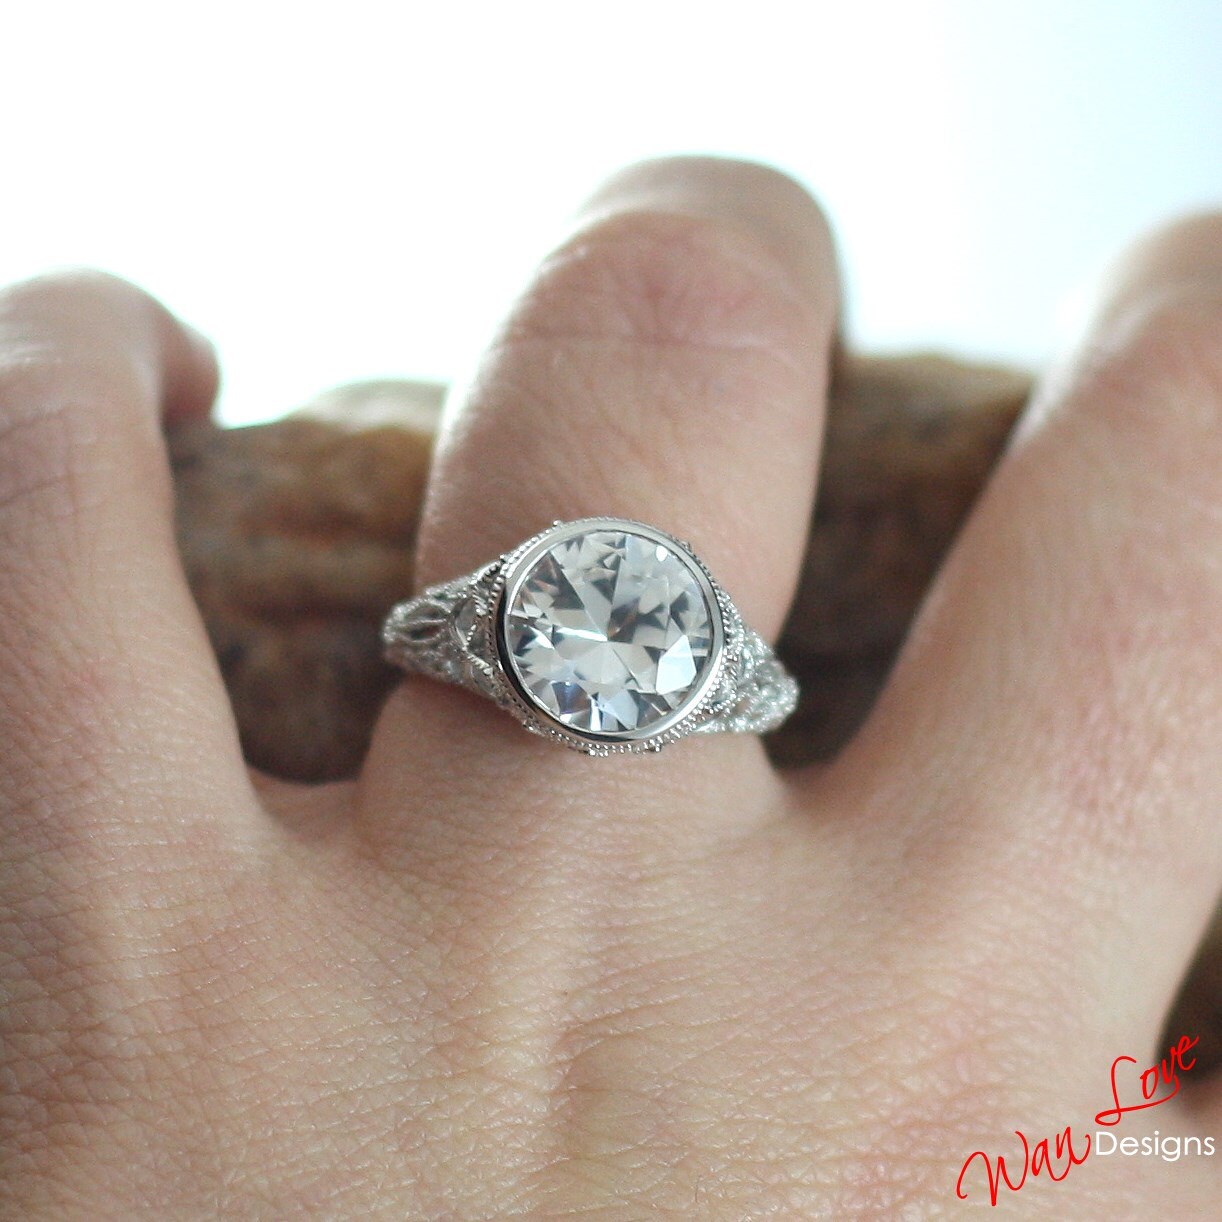 White Sapphire Solitaire Engagement Ring, Antique Filigree, Round, Silver Rhodium, 5ct, 10mm, 6.5, Wedding, Anniversary Gift, Ready to ship